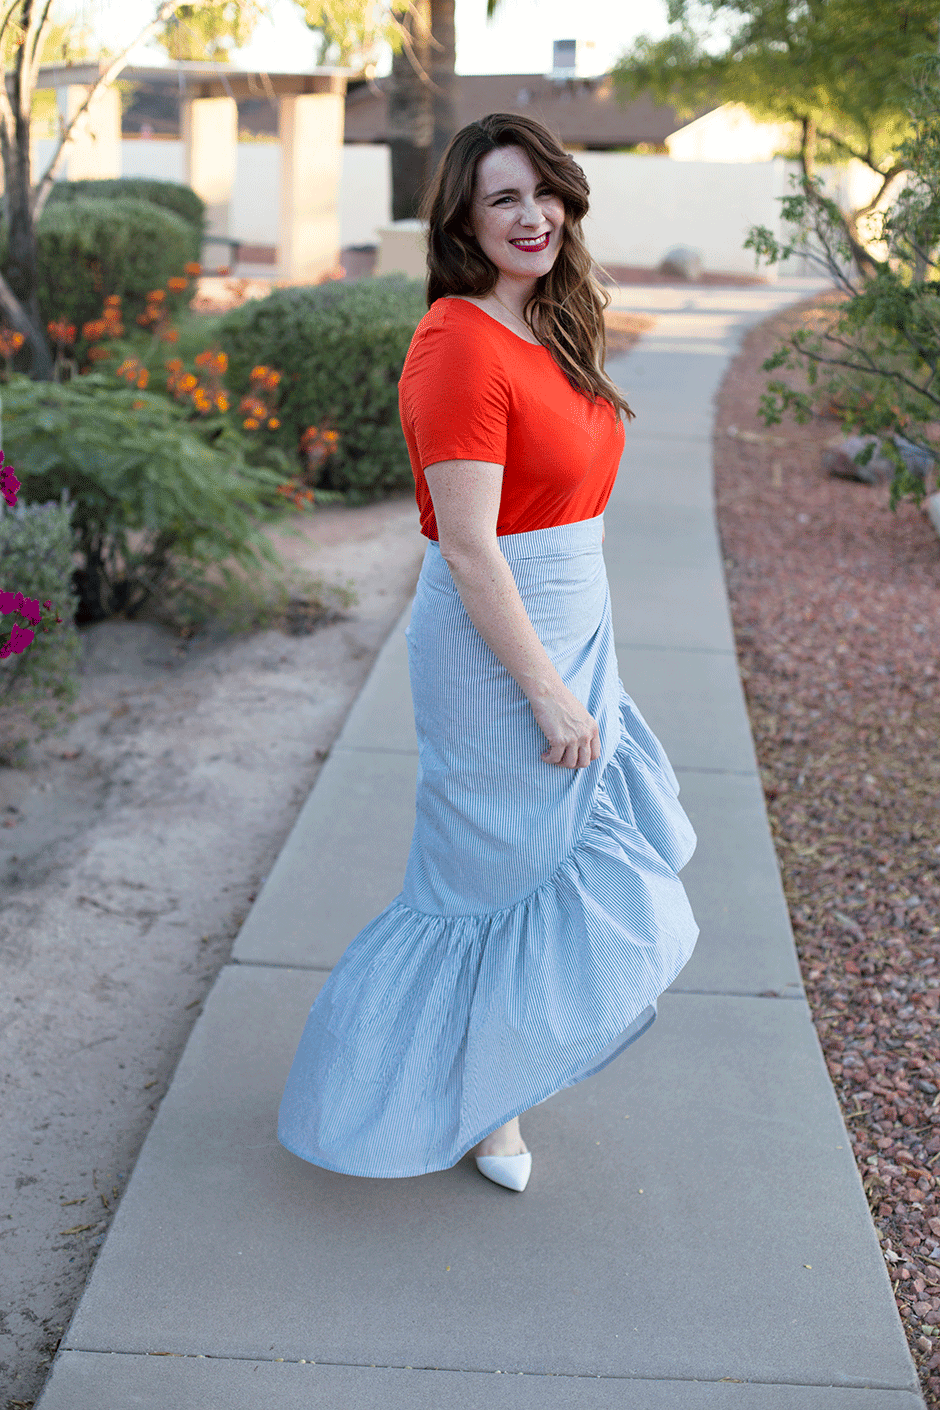 Copy one of the trendiest looks this year with a DIY ruffle hem wrap skirt! Ruffles are everywhere and this one is SO easy to replicate. Read on for the full sewing tutorial with step by step photos and instructions. Bonus: it fits a myriad of sizes!